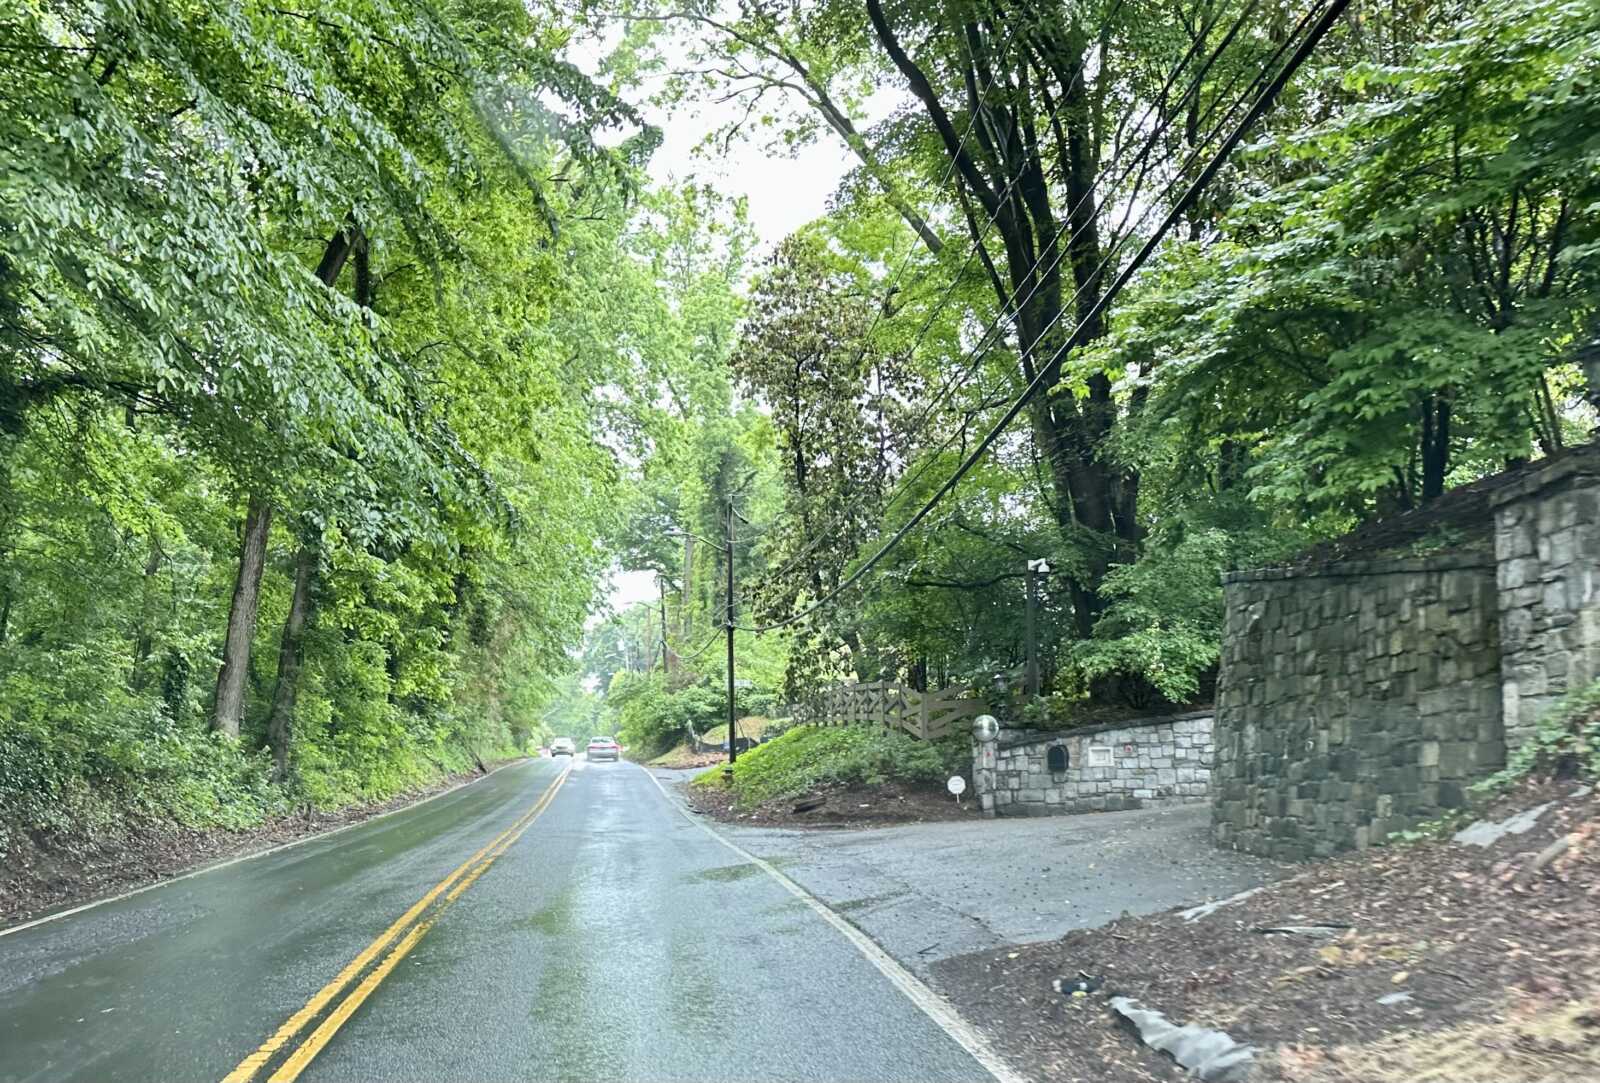 Local road named ‘most coveted address’ in Virginia | ARLnow.com